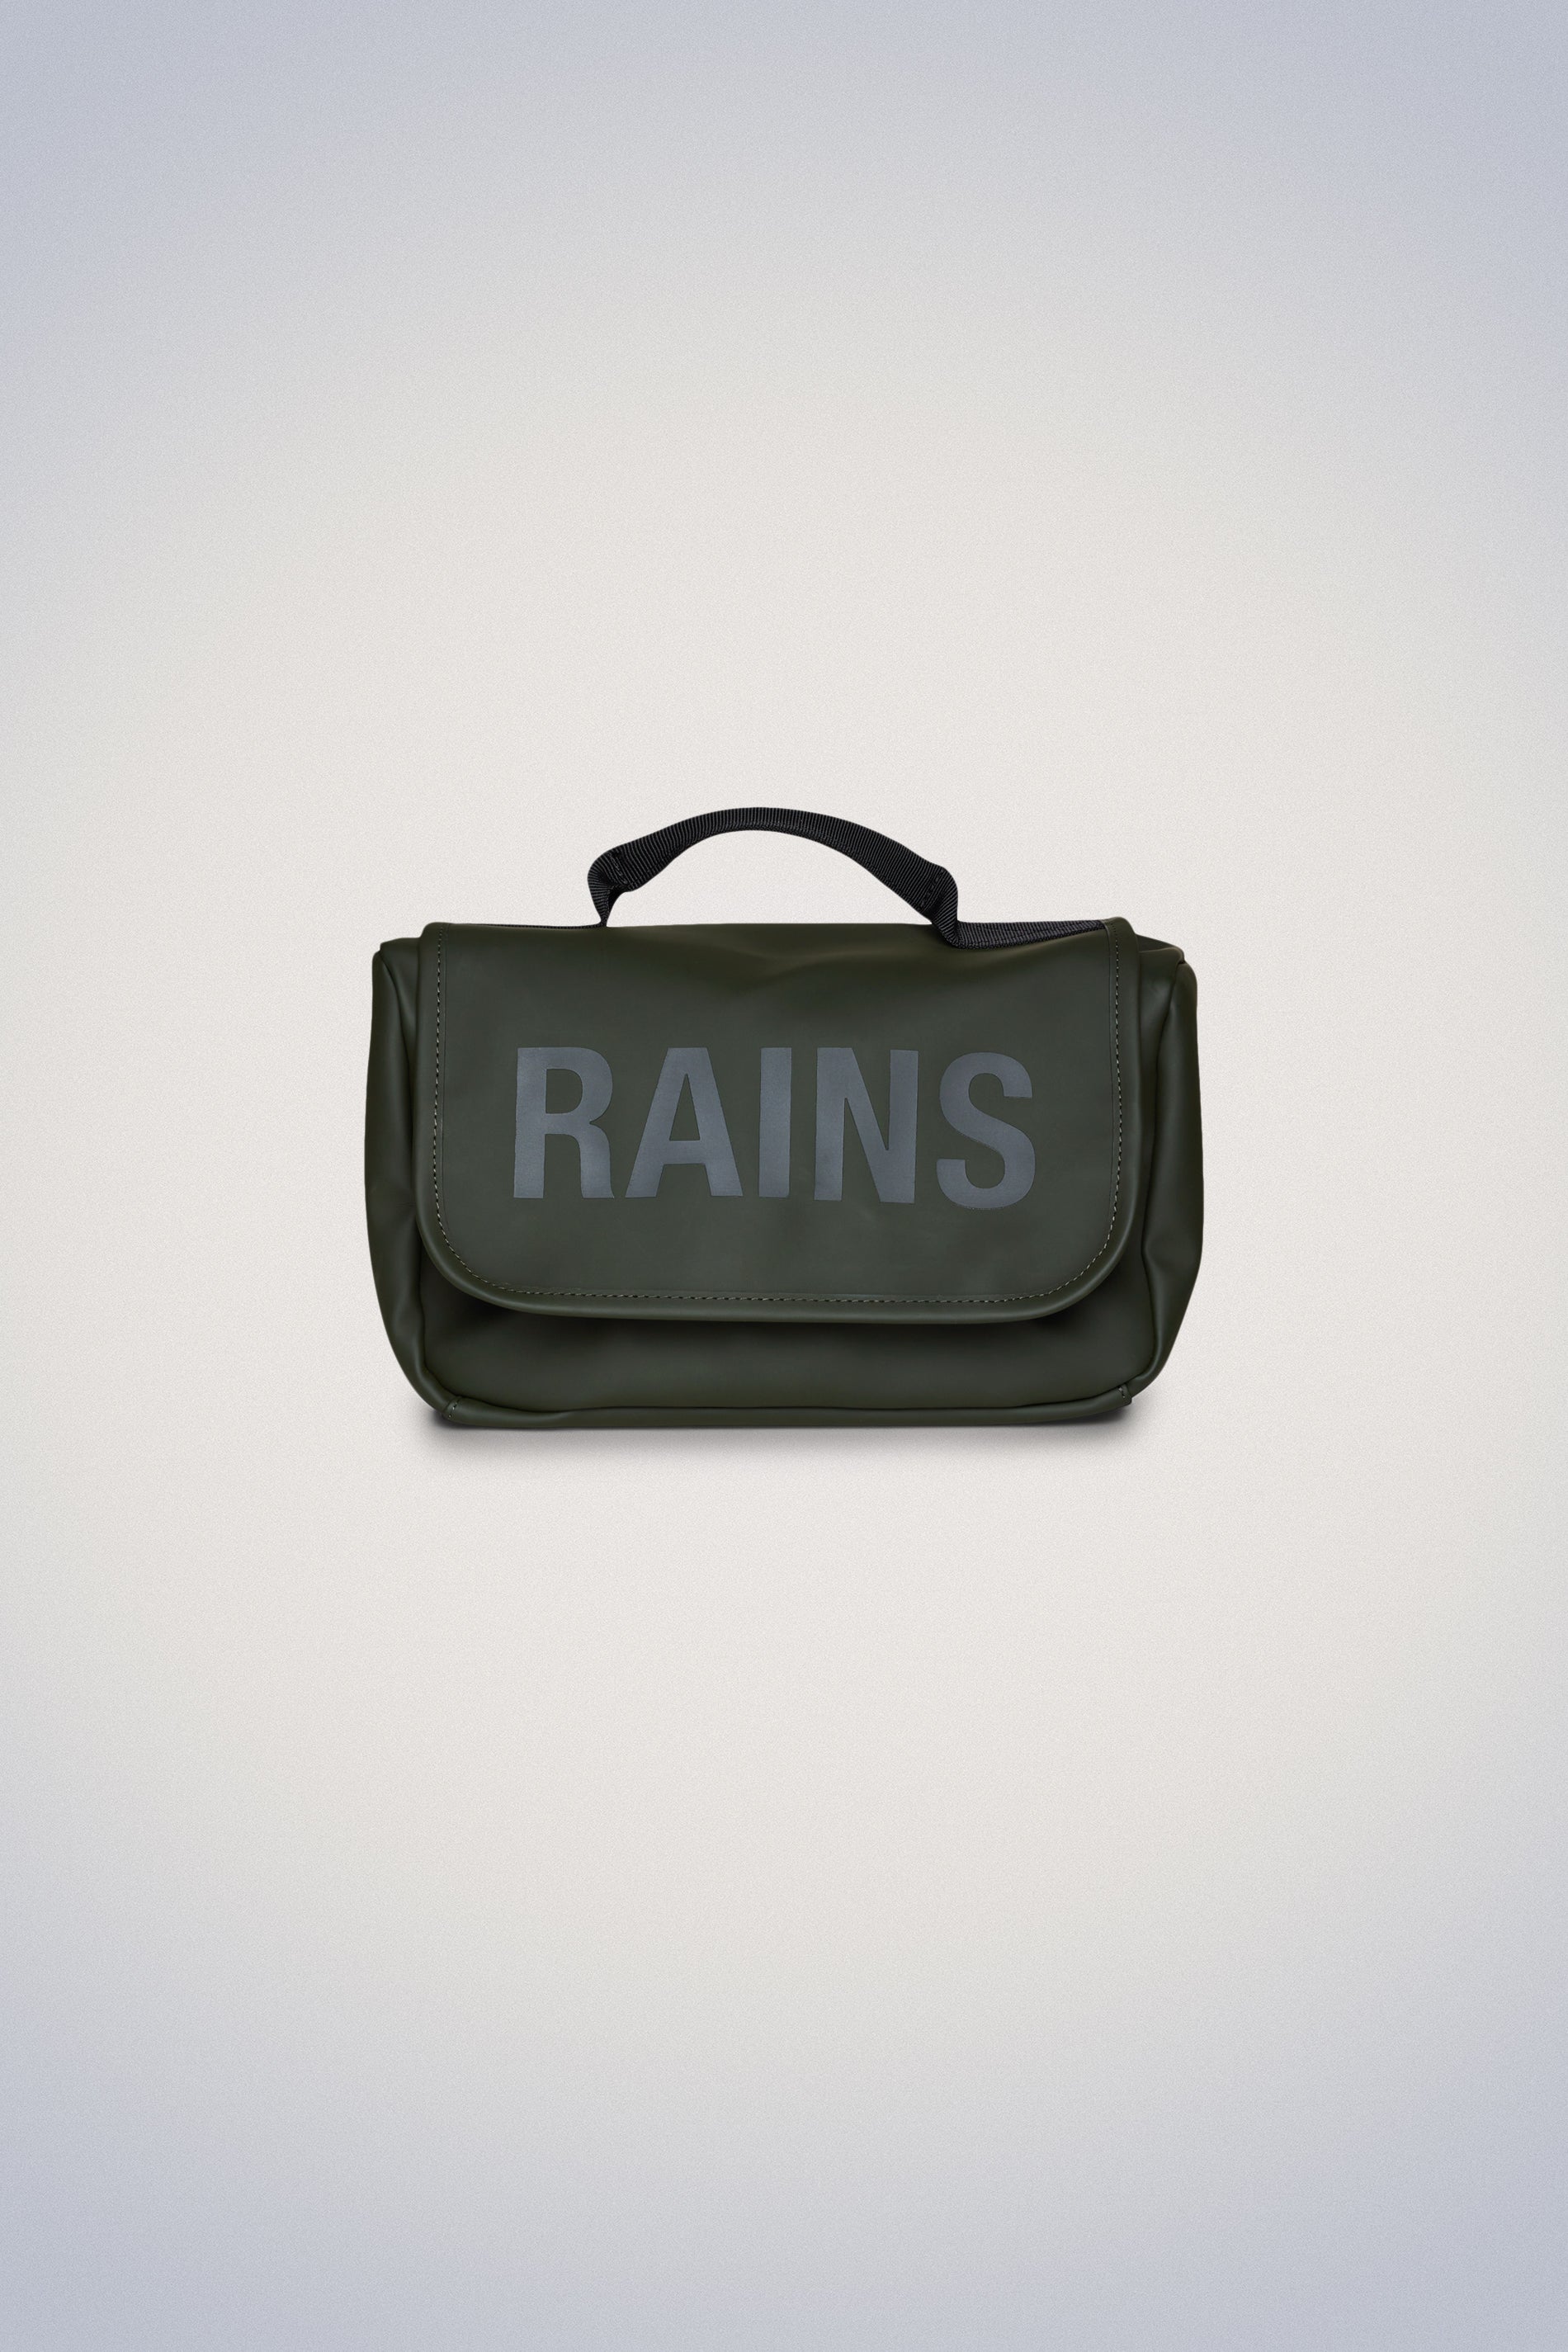 Rains® Hilo Wash Bag in Navy for $50